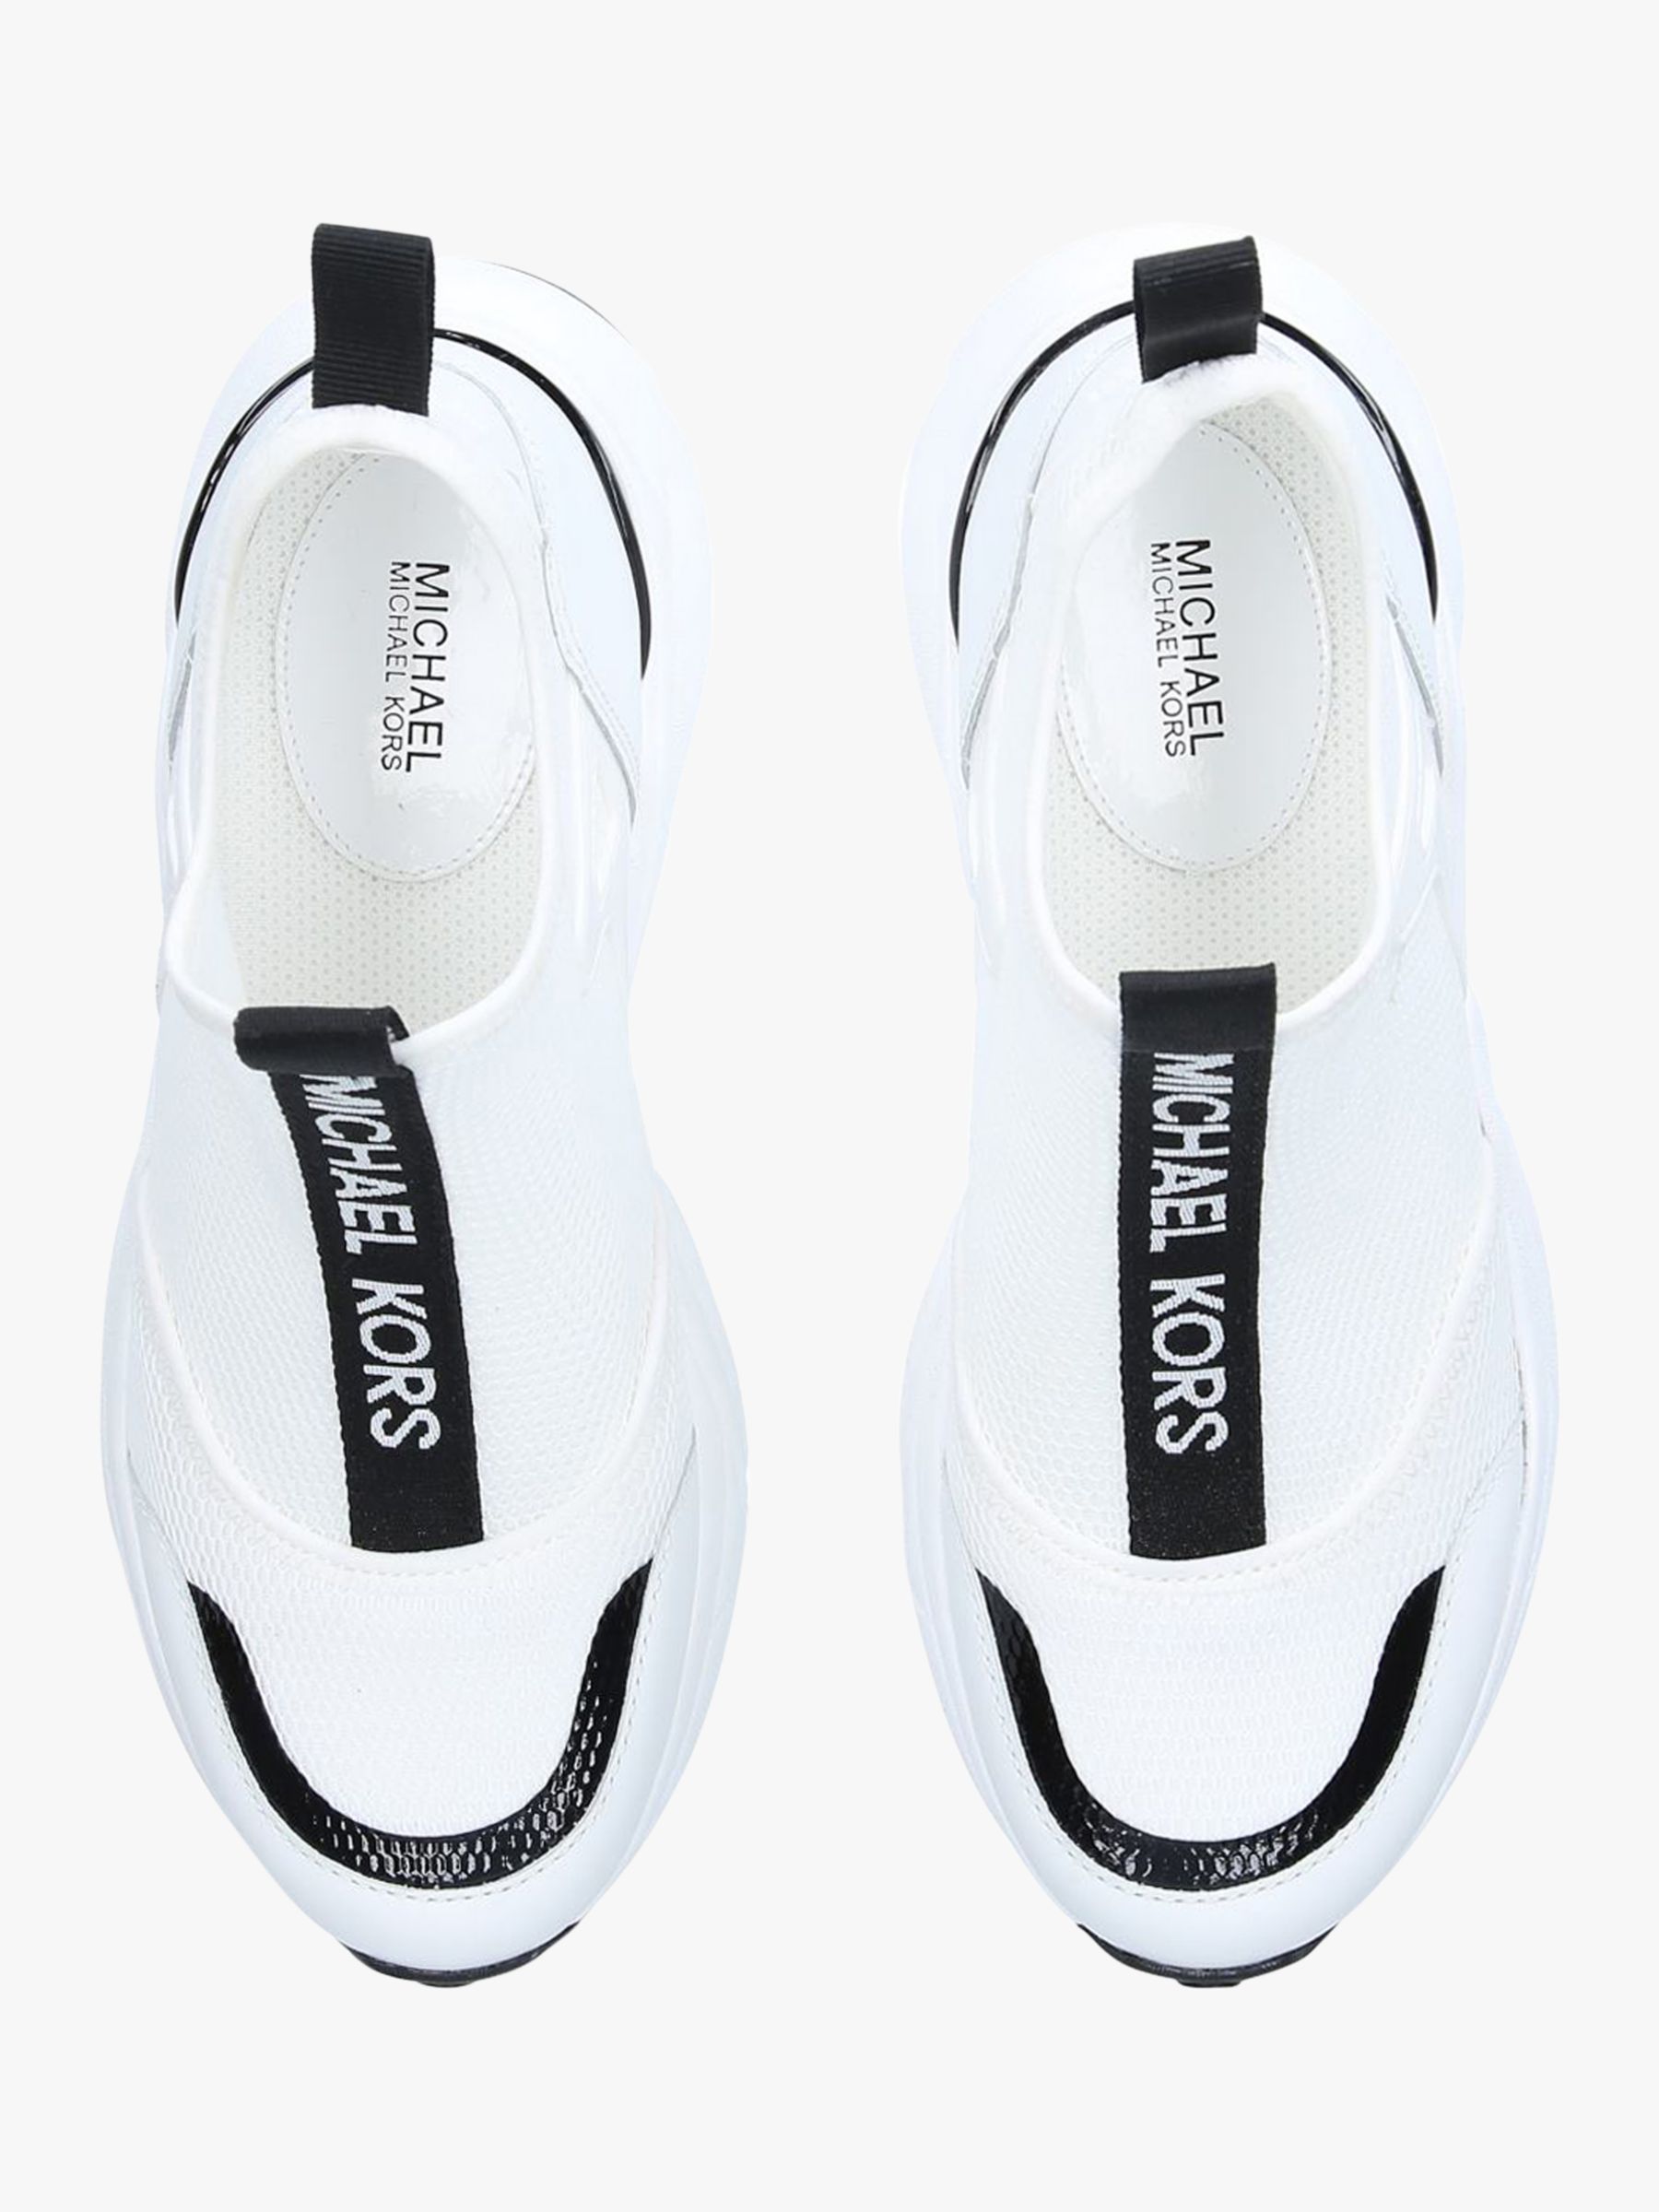 michael kors black and white shoes